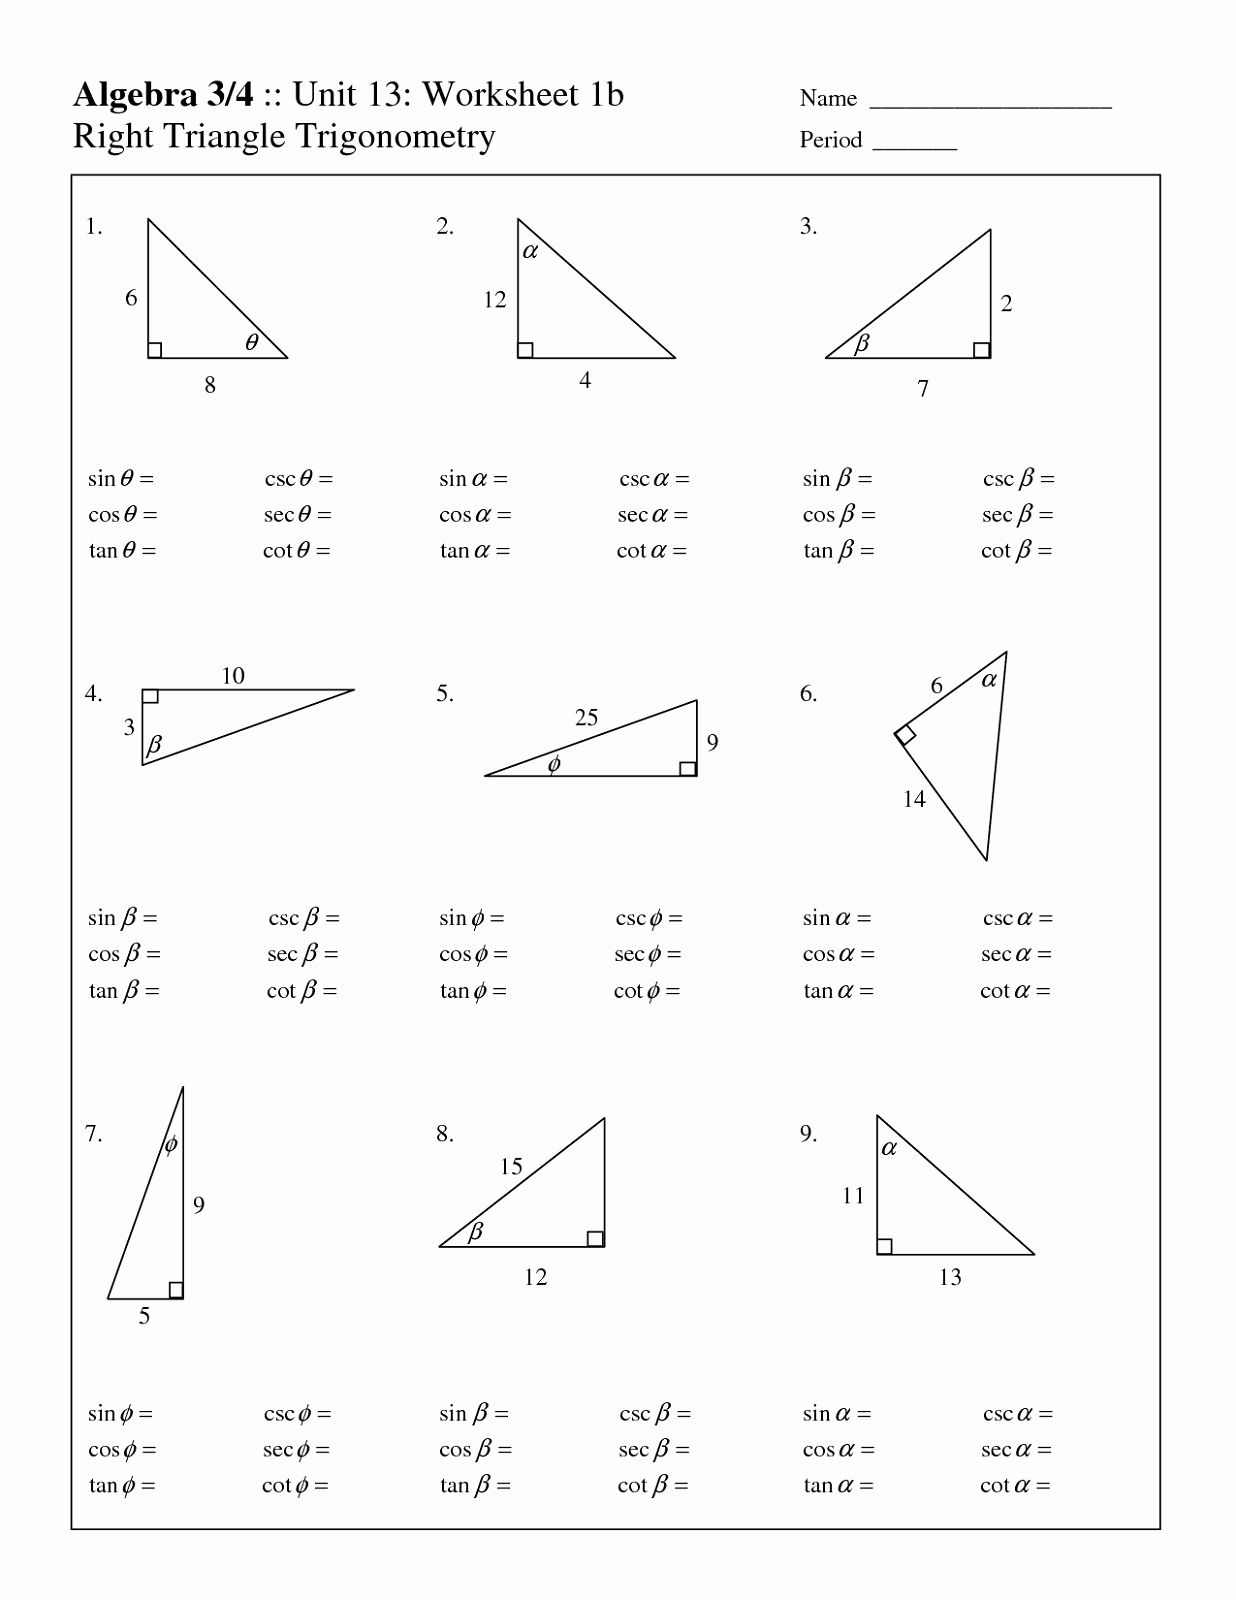 Right Triangle Trig Worksheet Answers Beautiful Free Fact 